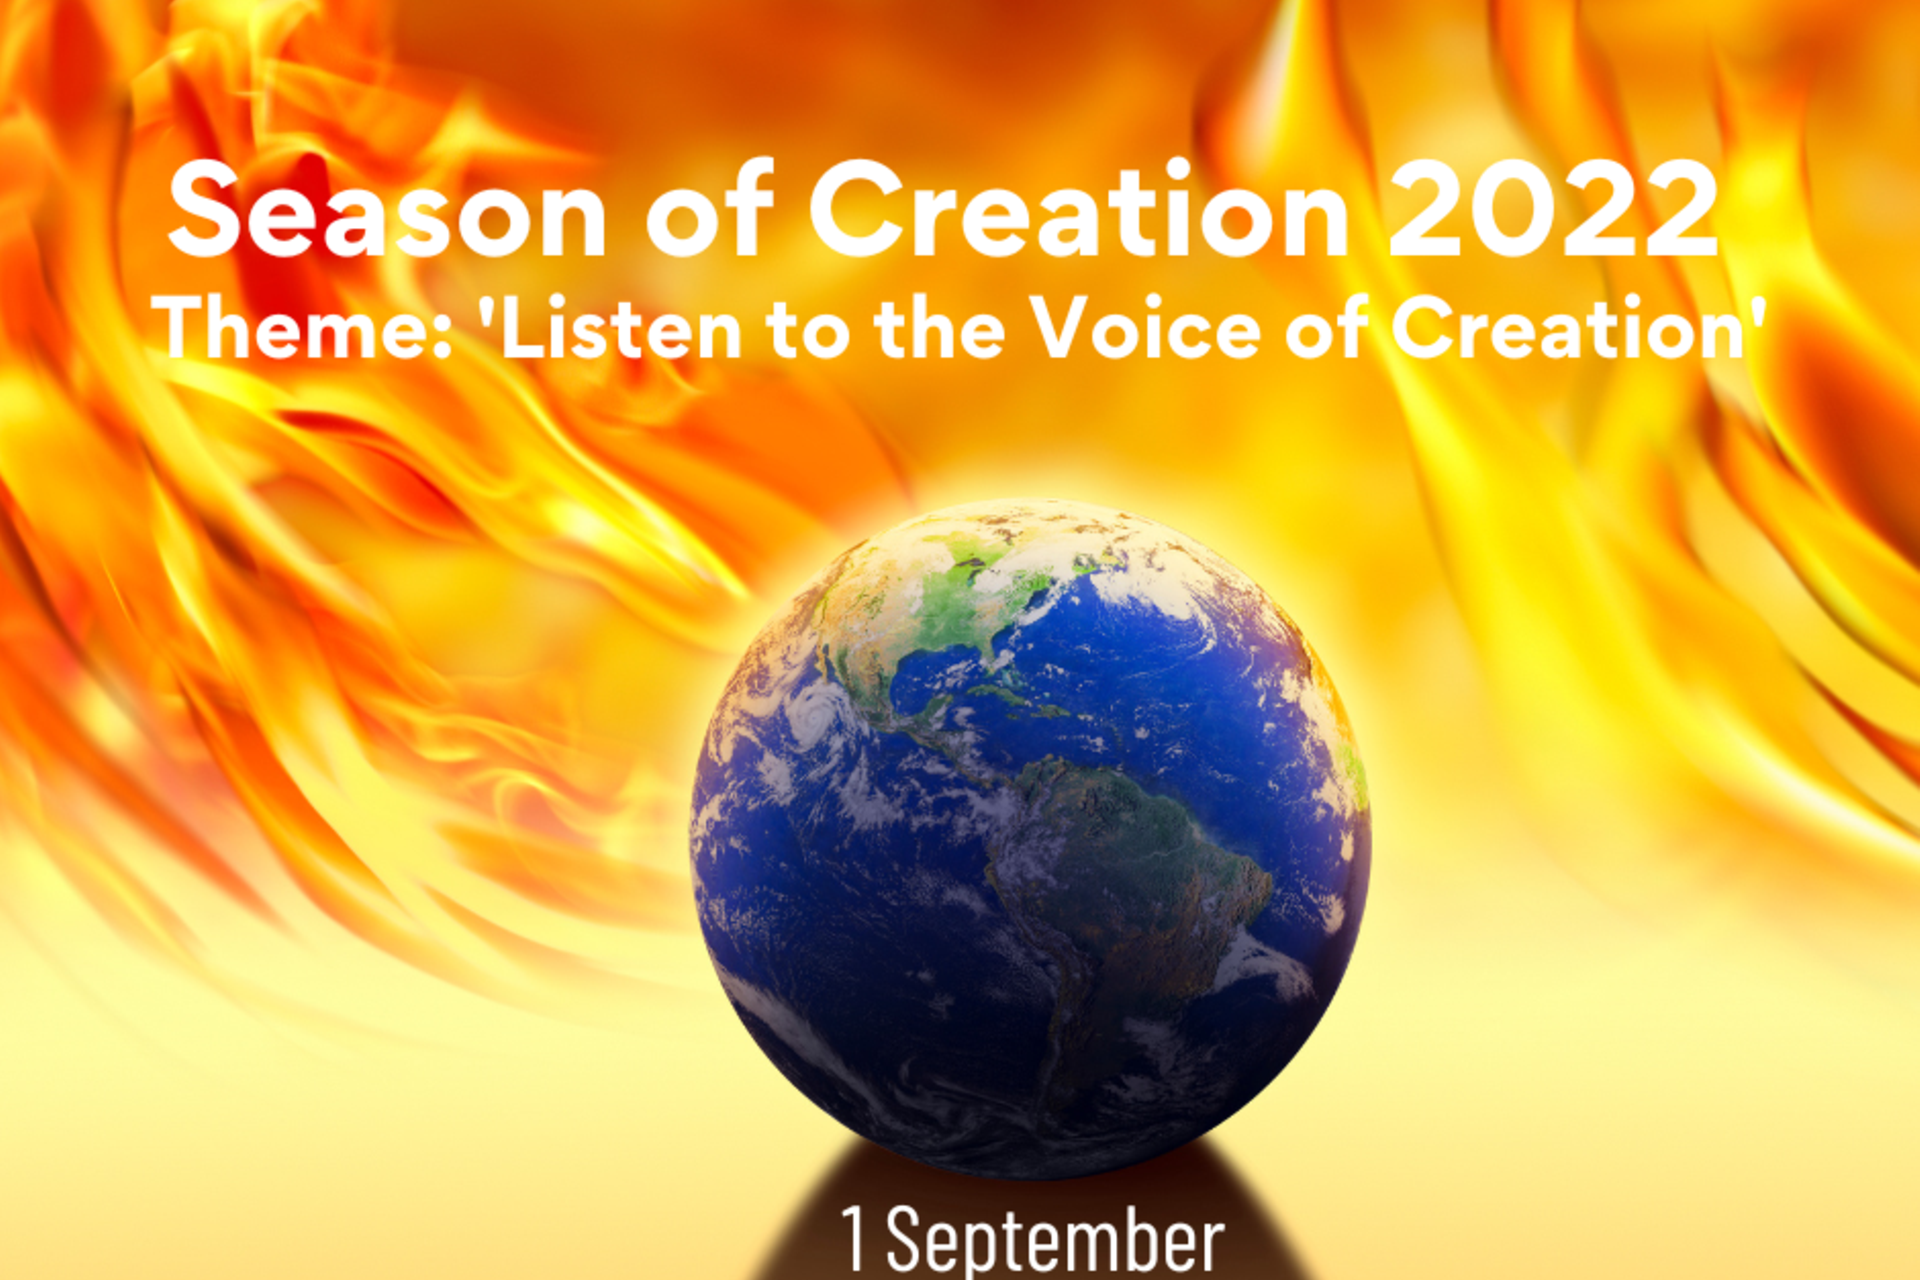 Resources for the Season of Creation 2022